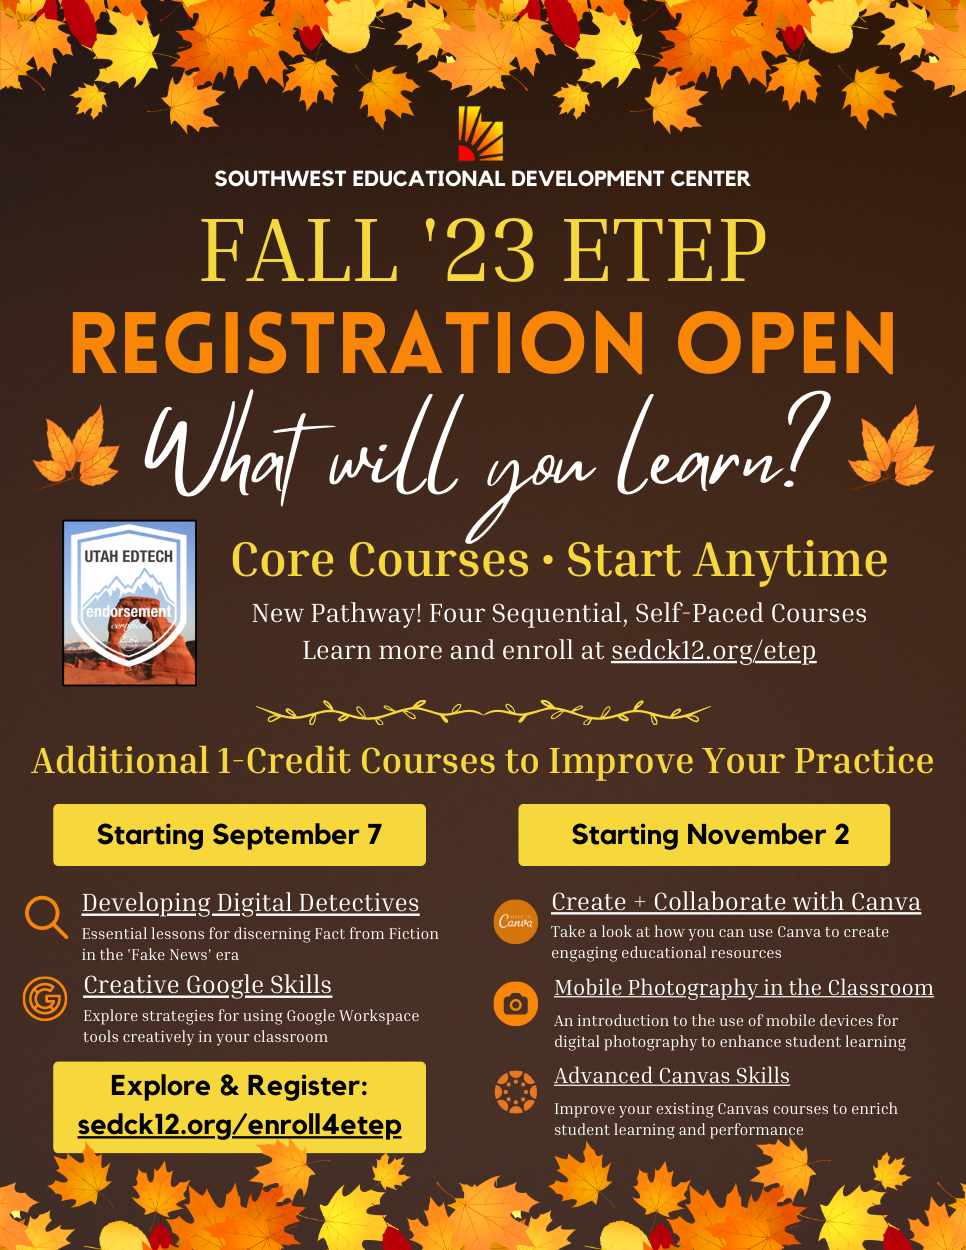 Informational flyer for the Fall '23 ETEP courses from SEDC